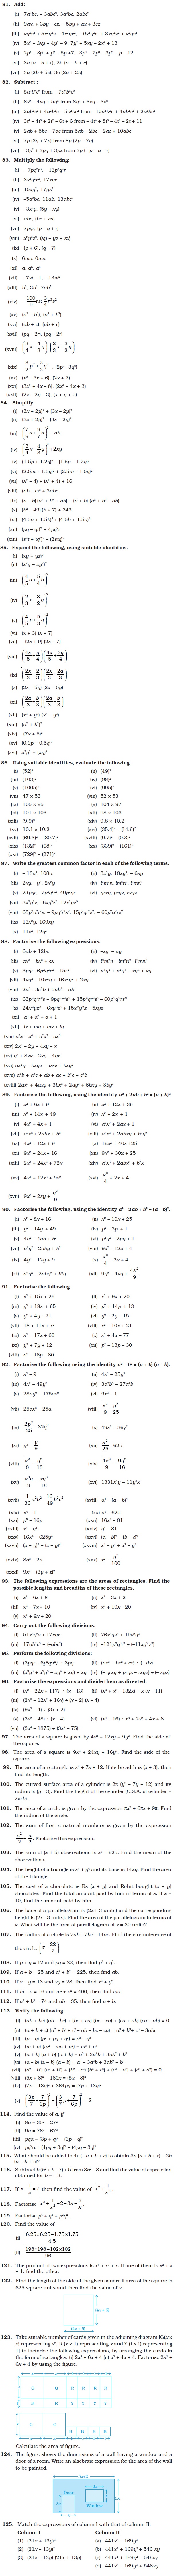 Algebraic Expressions, Identities and Factorisation